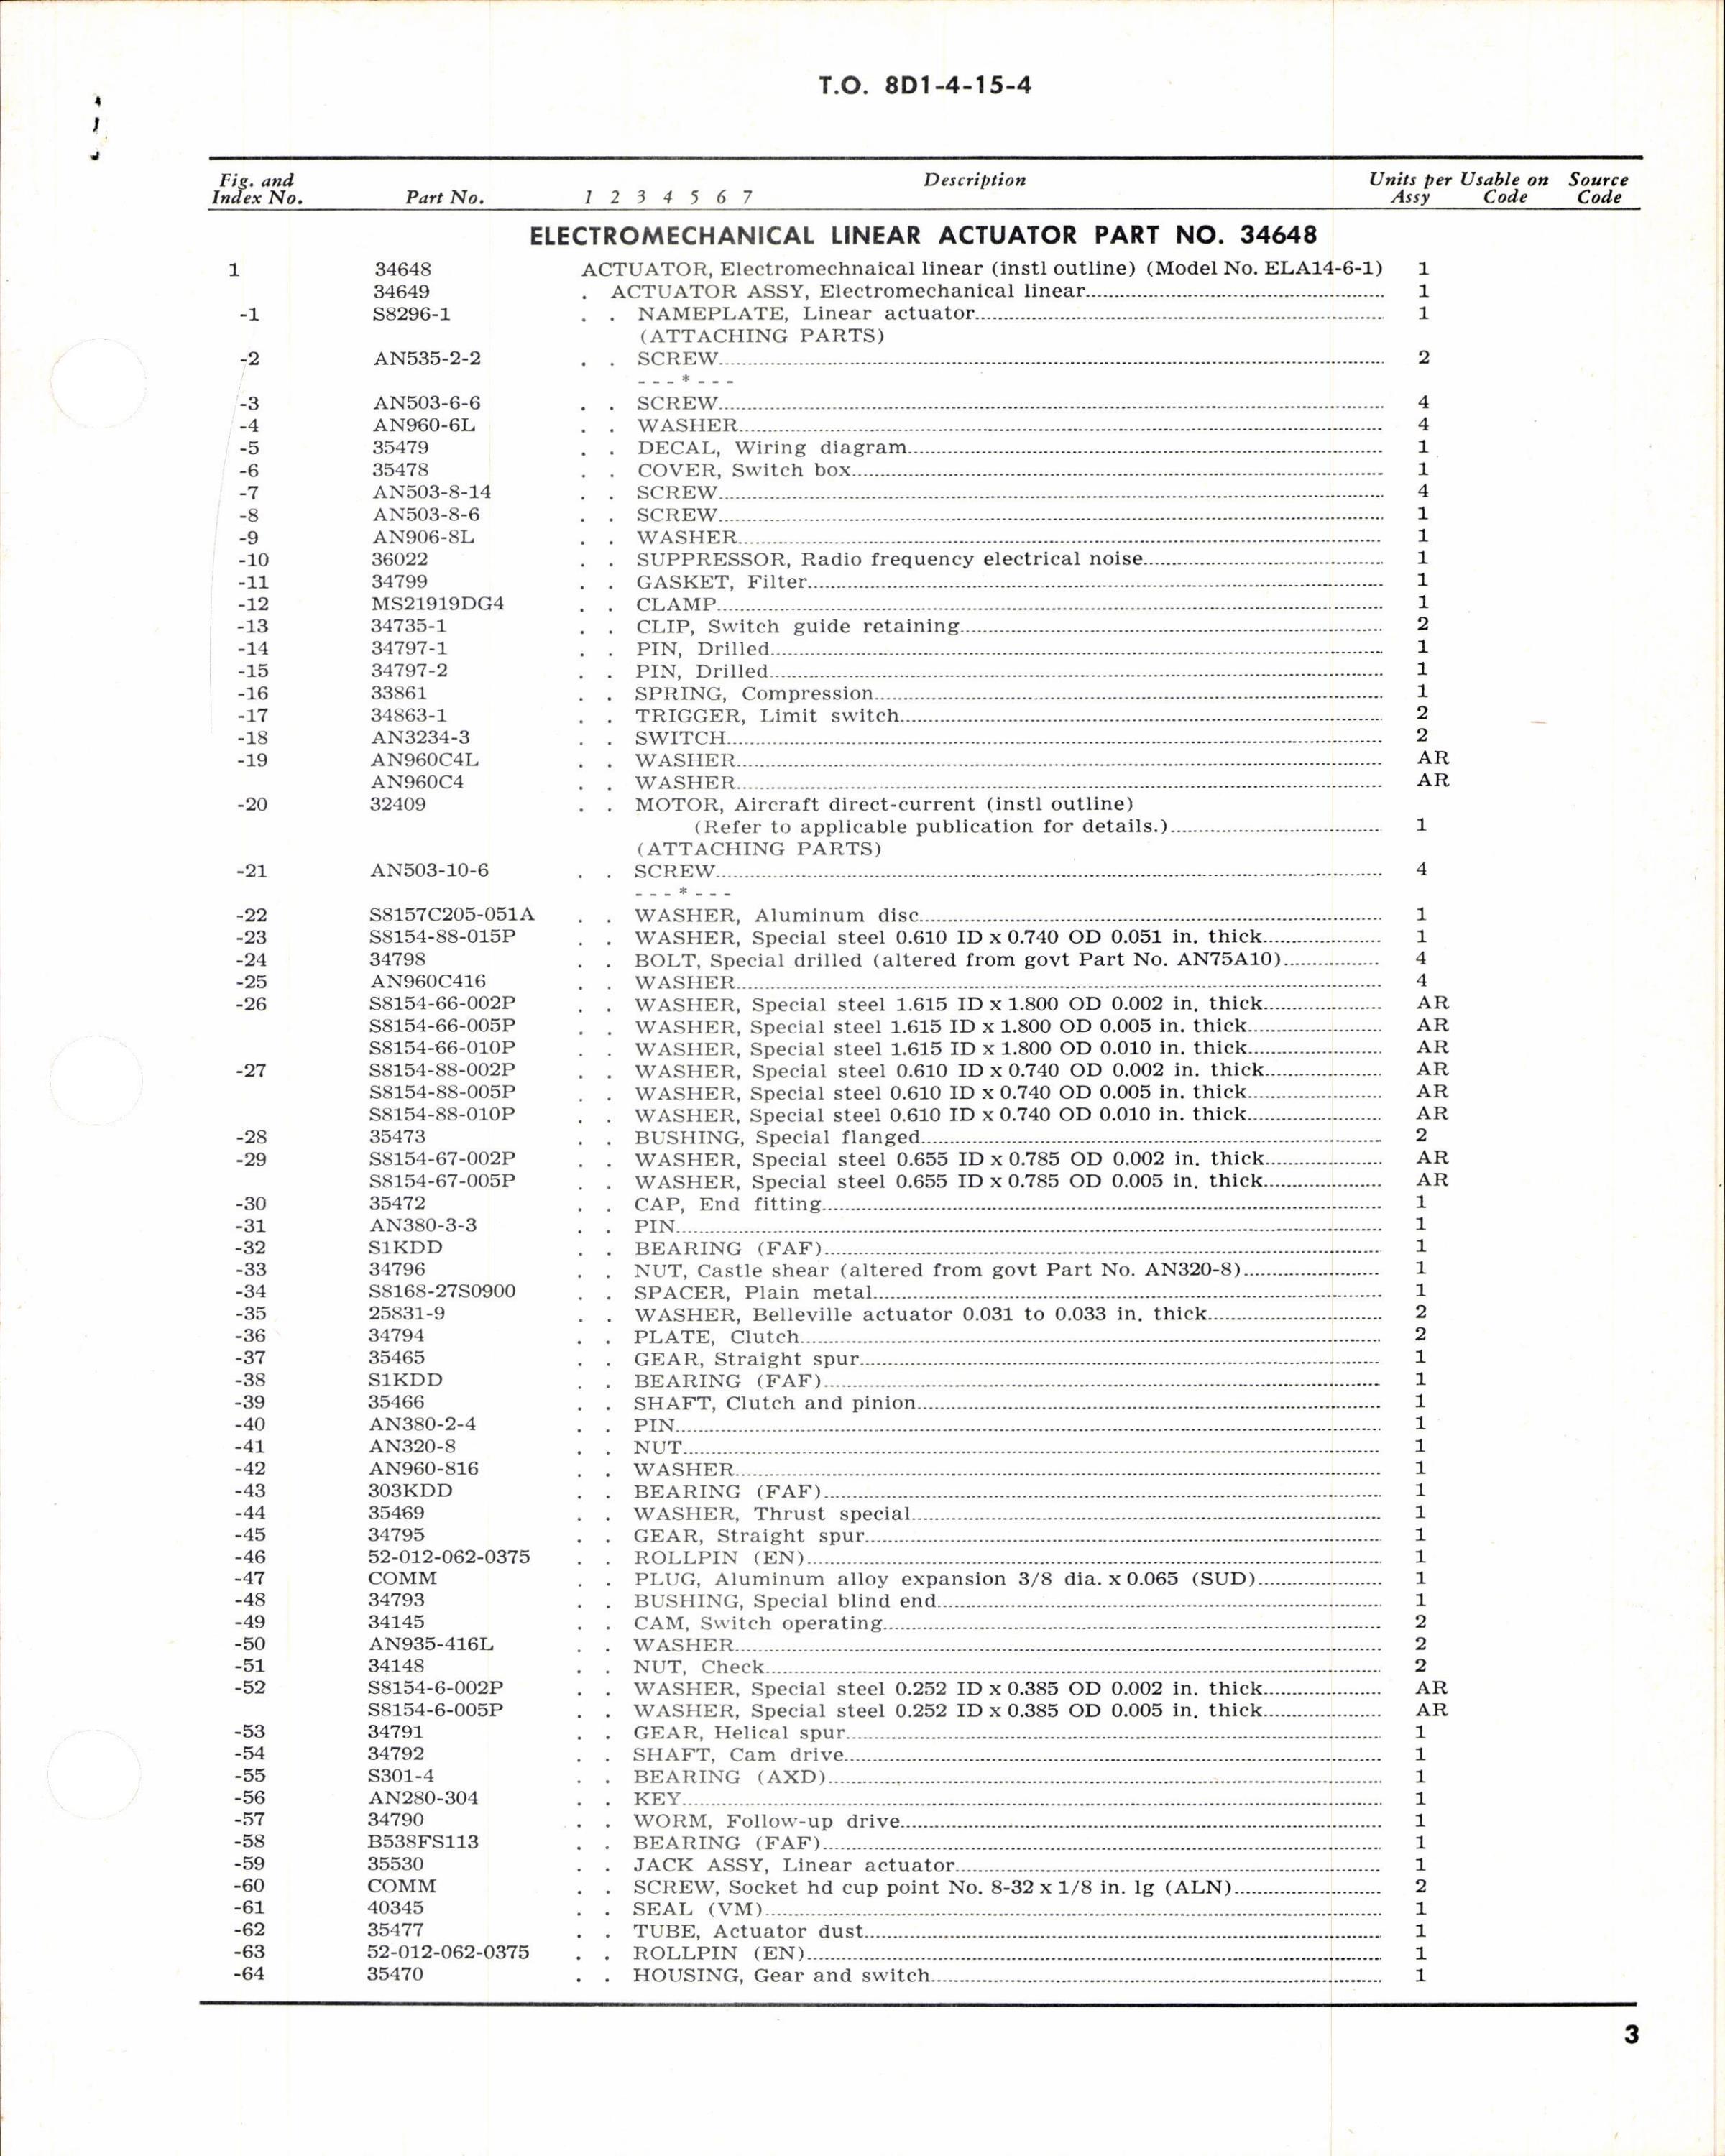 Sample page 3 from AirCorps Library document: Parts Breakdown for Electromechanical Linear Actuator